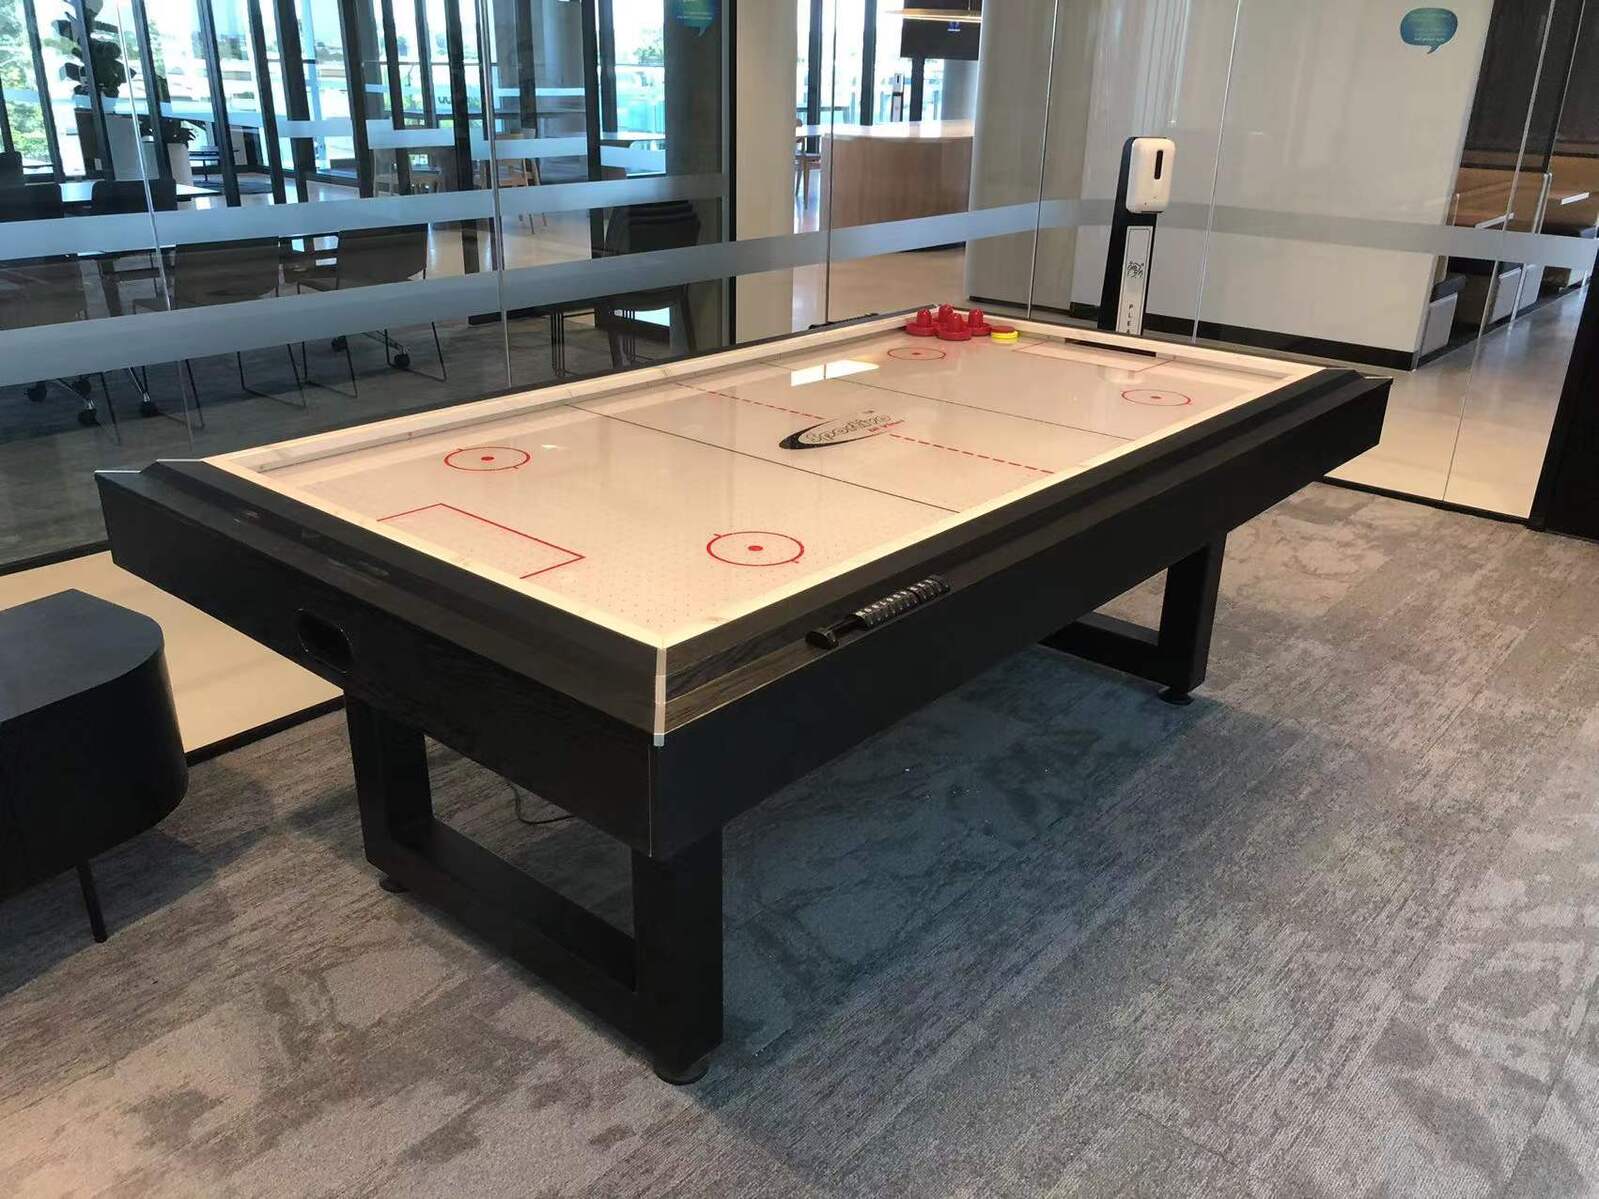 8ft Air Hockey Table with Perspex Top - Hurricane